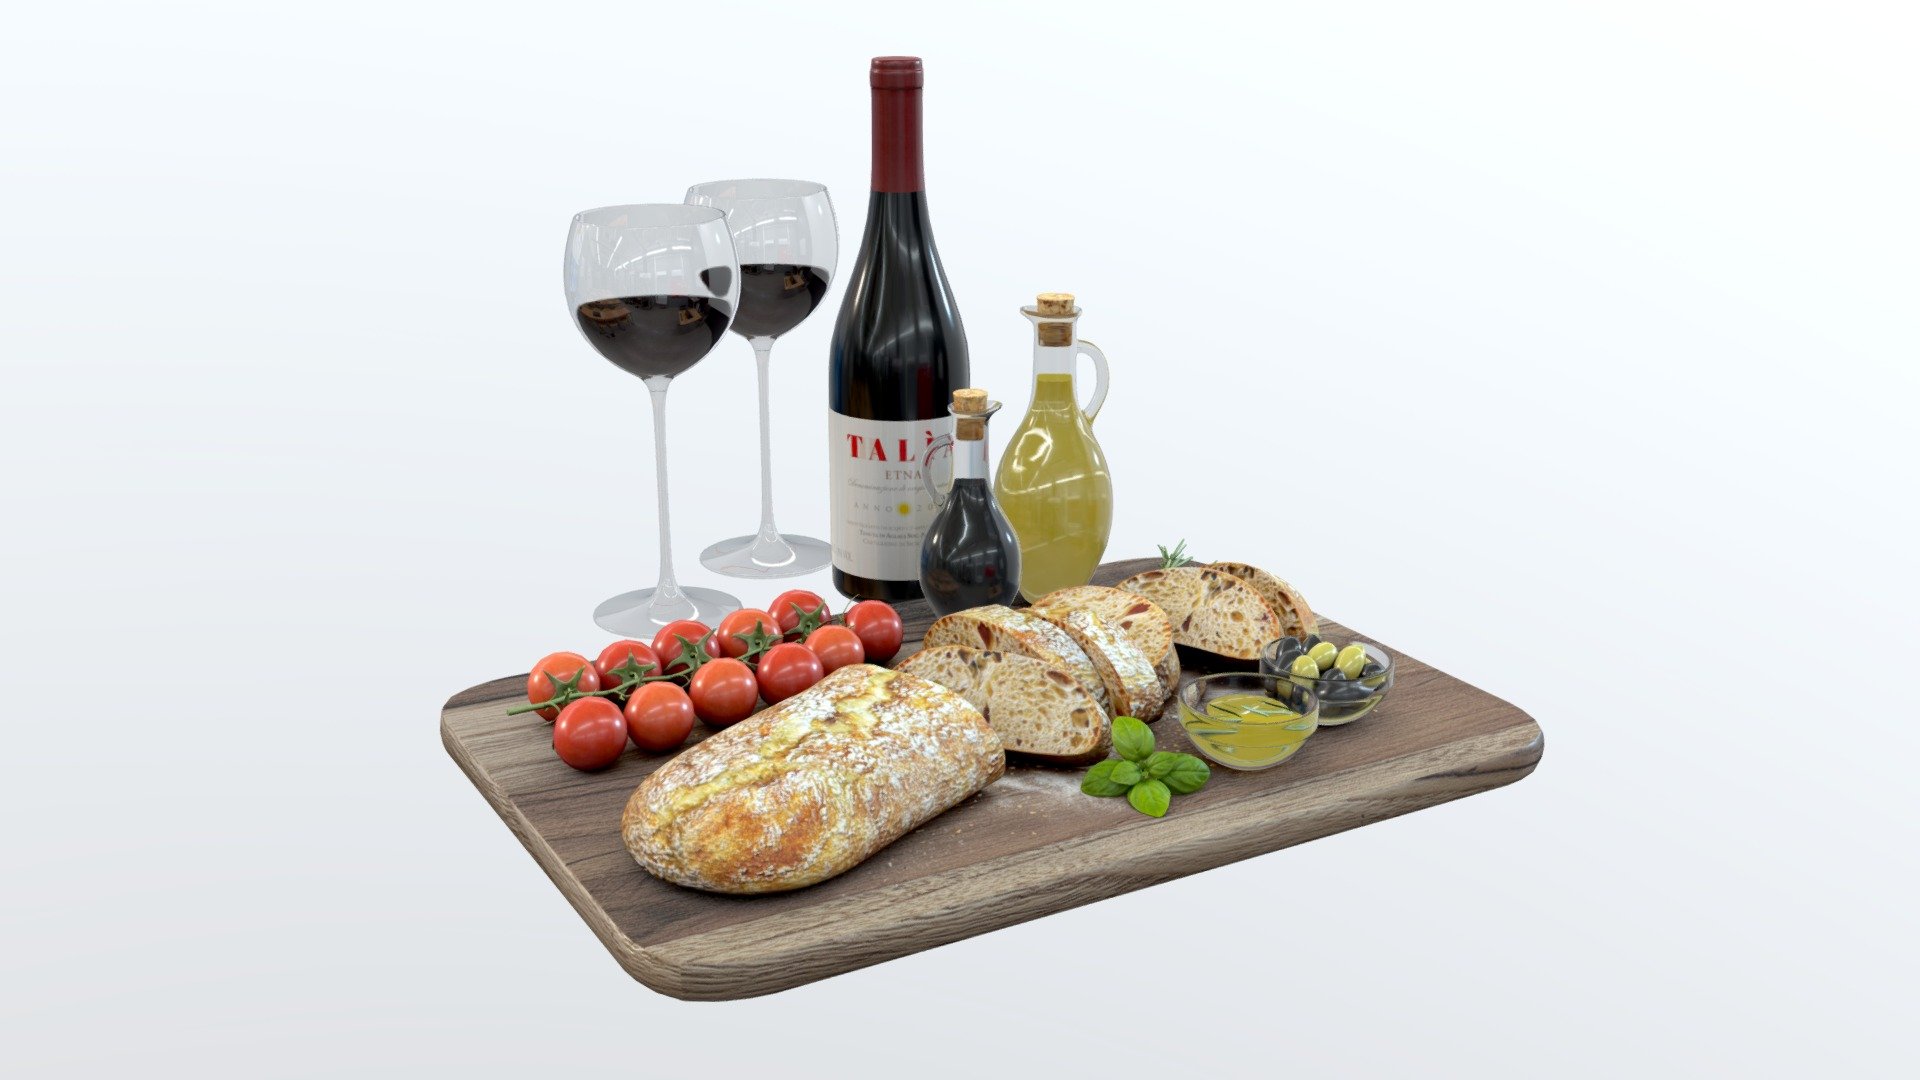 High-quality 3d model of a Bread Board with cherry tomatoes, olives, olive oil, vinegar, basil, rosemary, and wine.
PBR materials 3d model